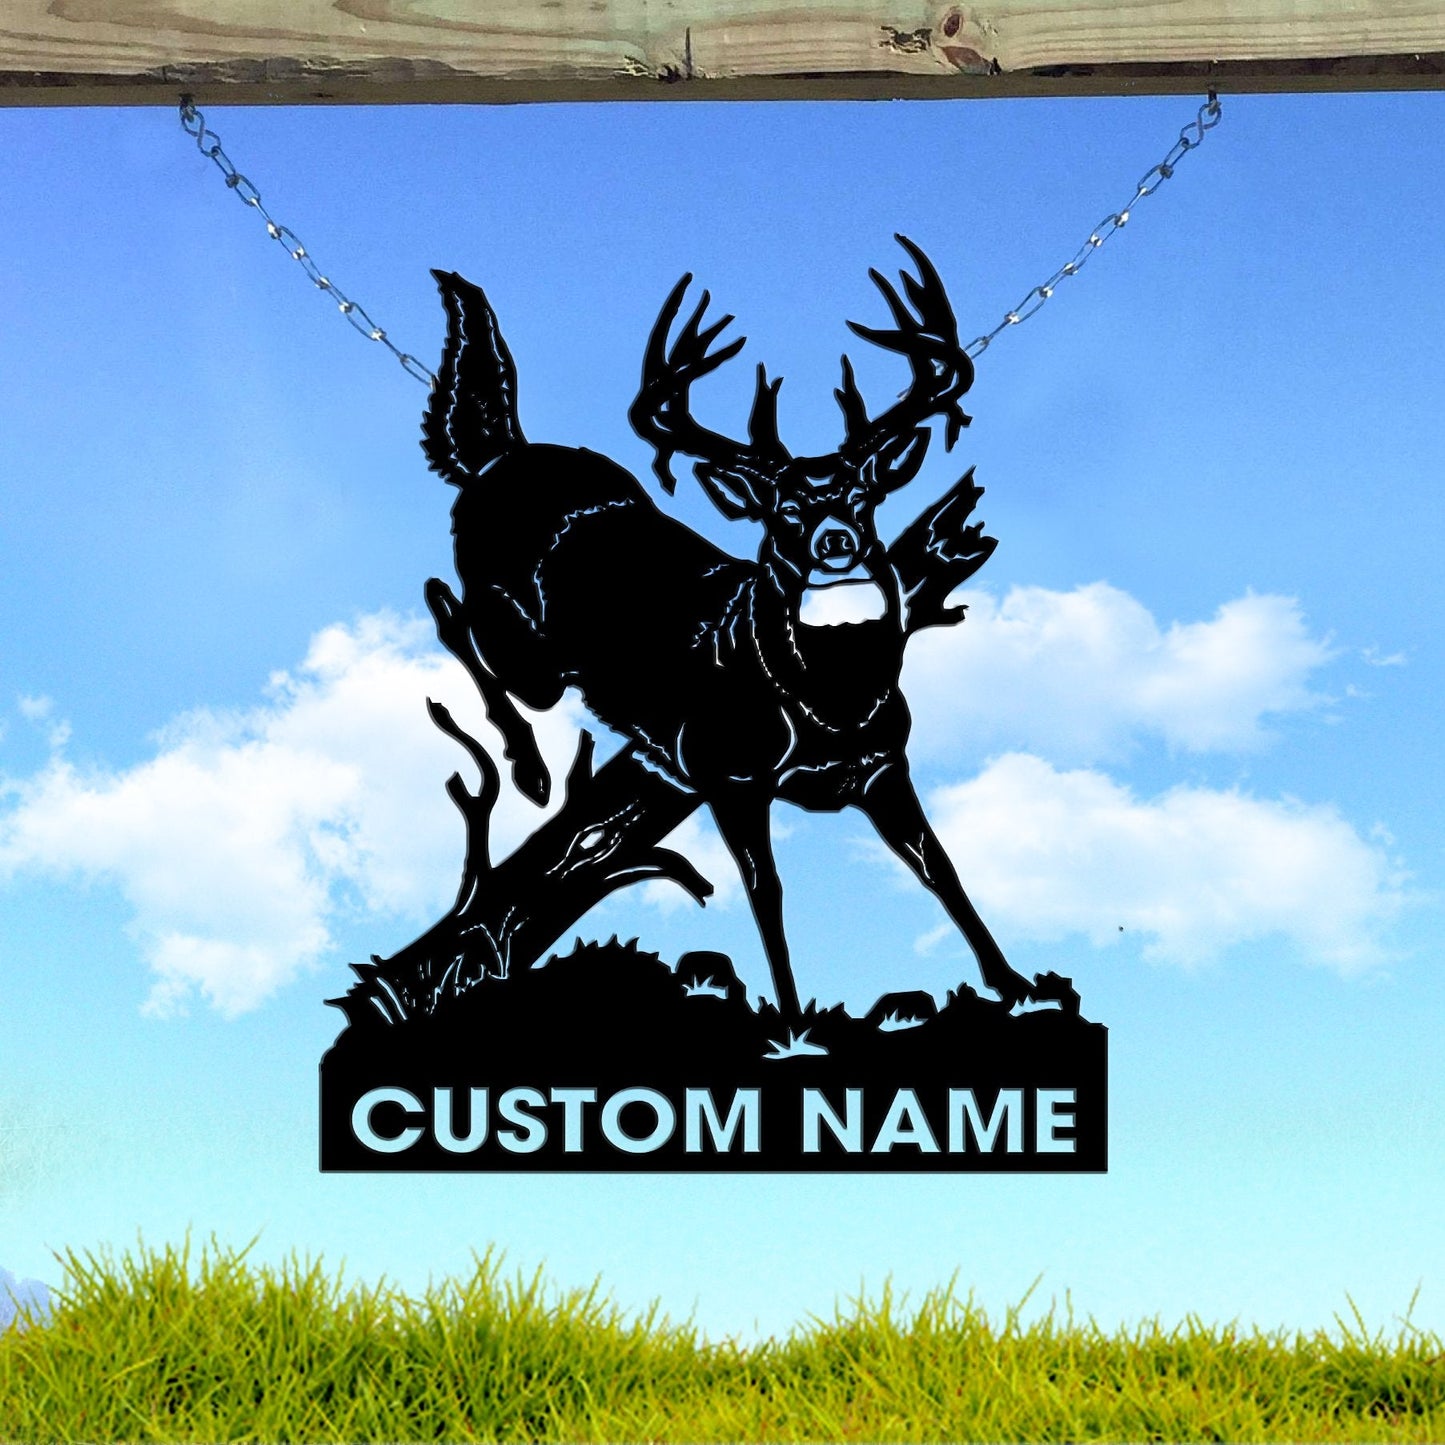 Triple Threat Custom name Custom Metal Hunting Sign-Personalized Hunting Gifts-Hunter Gifts-Gift for Him